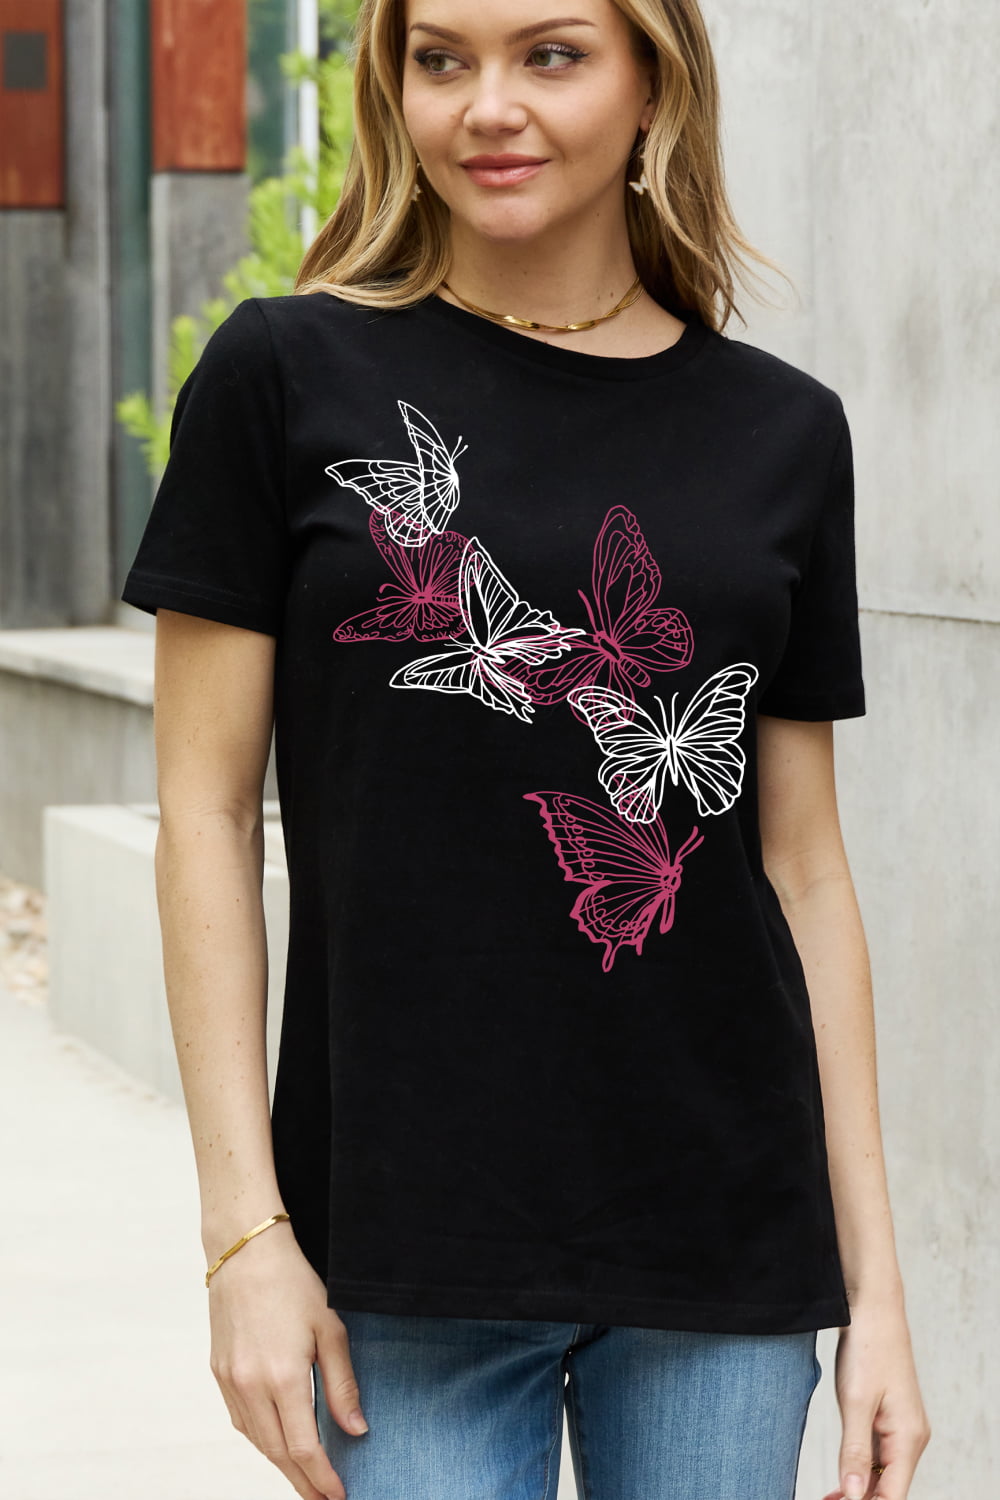 Simply Love Full Size Butterfly Graphic Cotton Tee